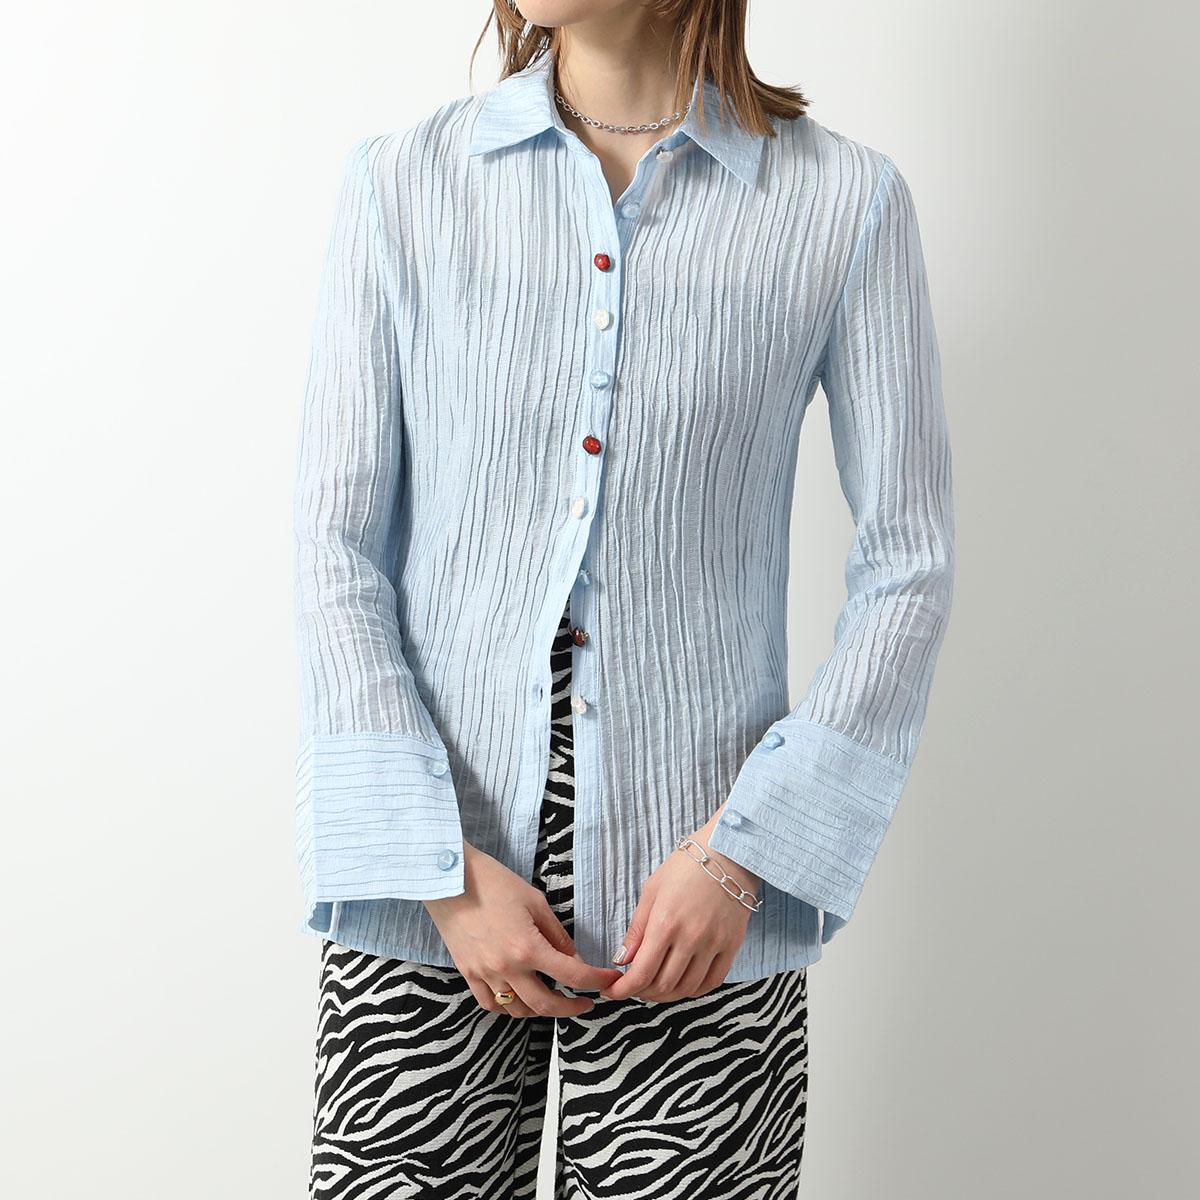 GHOSPELL ゴスペル シャツ Prue Mixed Button Shirt レディース ブラウス 長袖 カラーボタン Tropical-Blue｜s-musee｜02